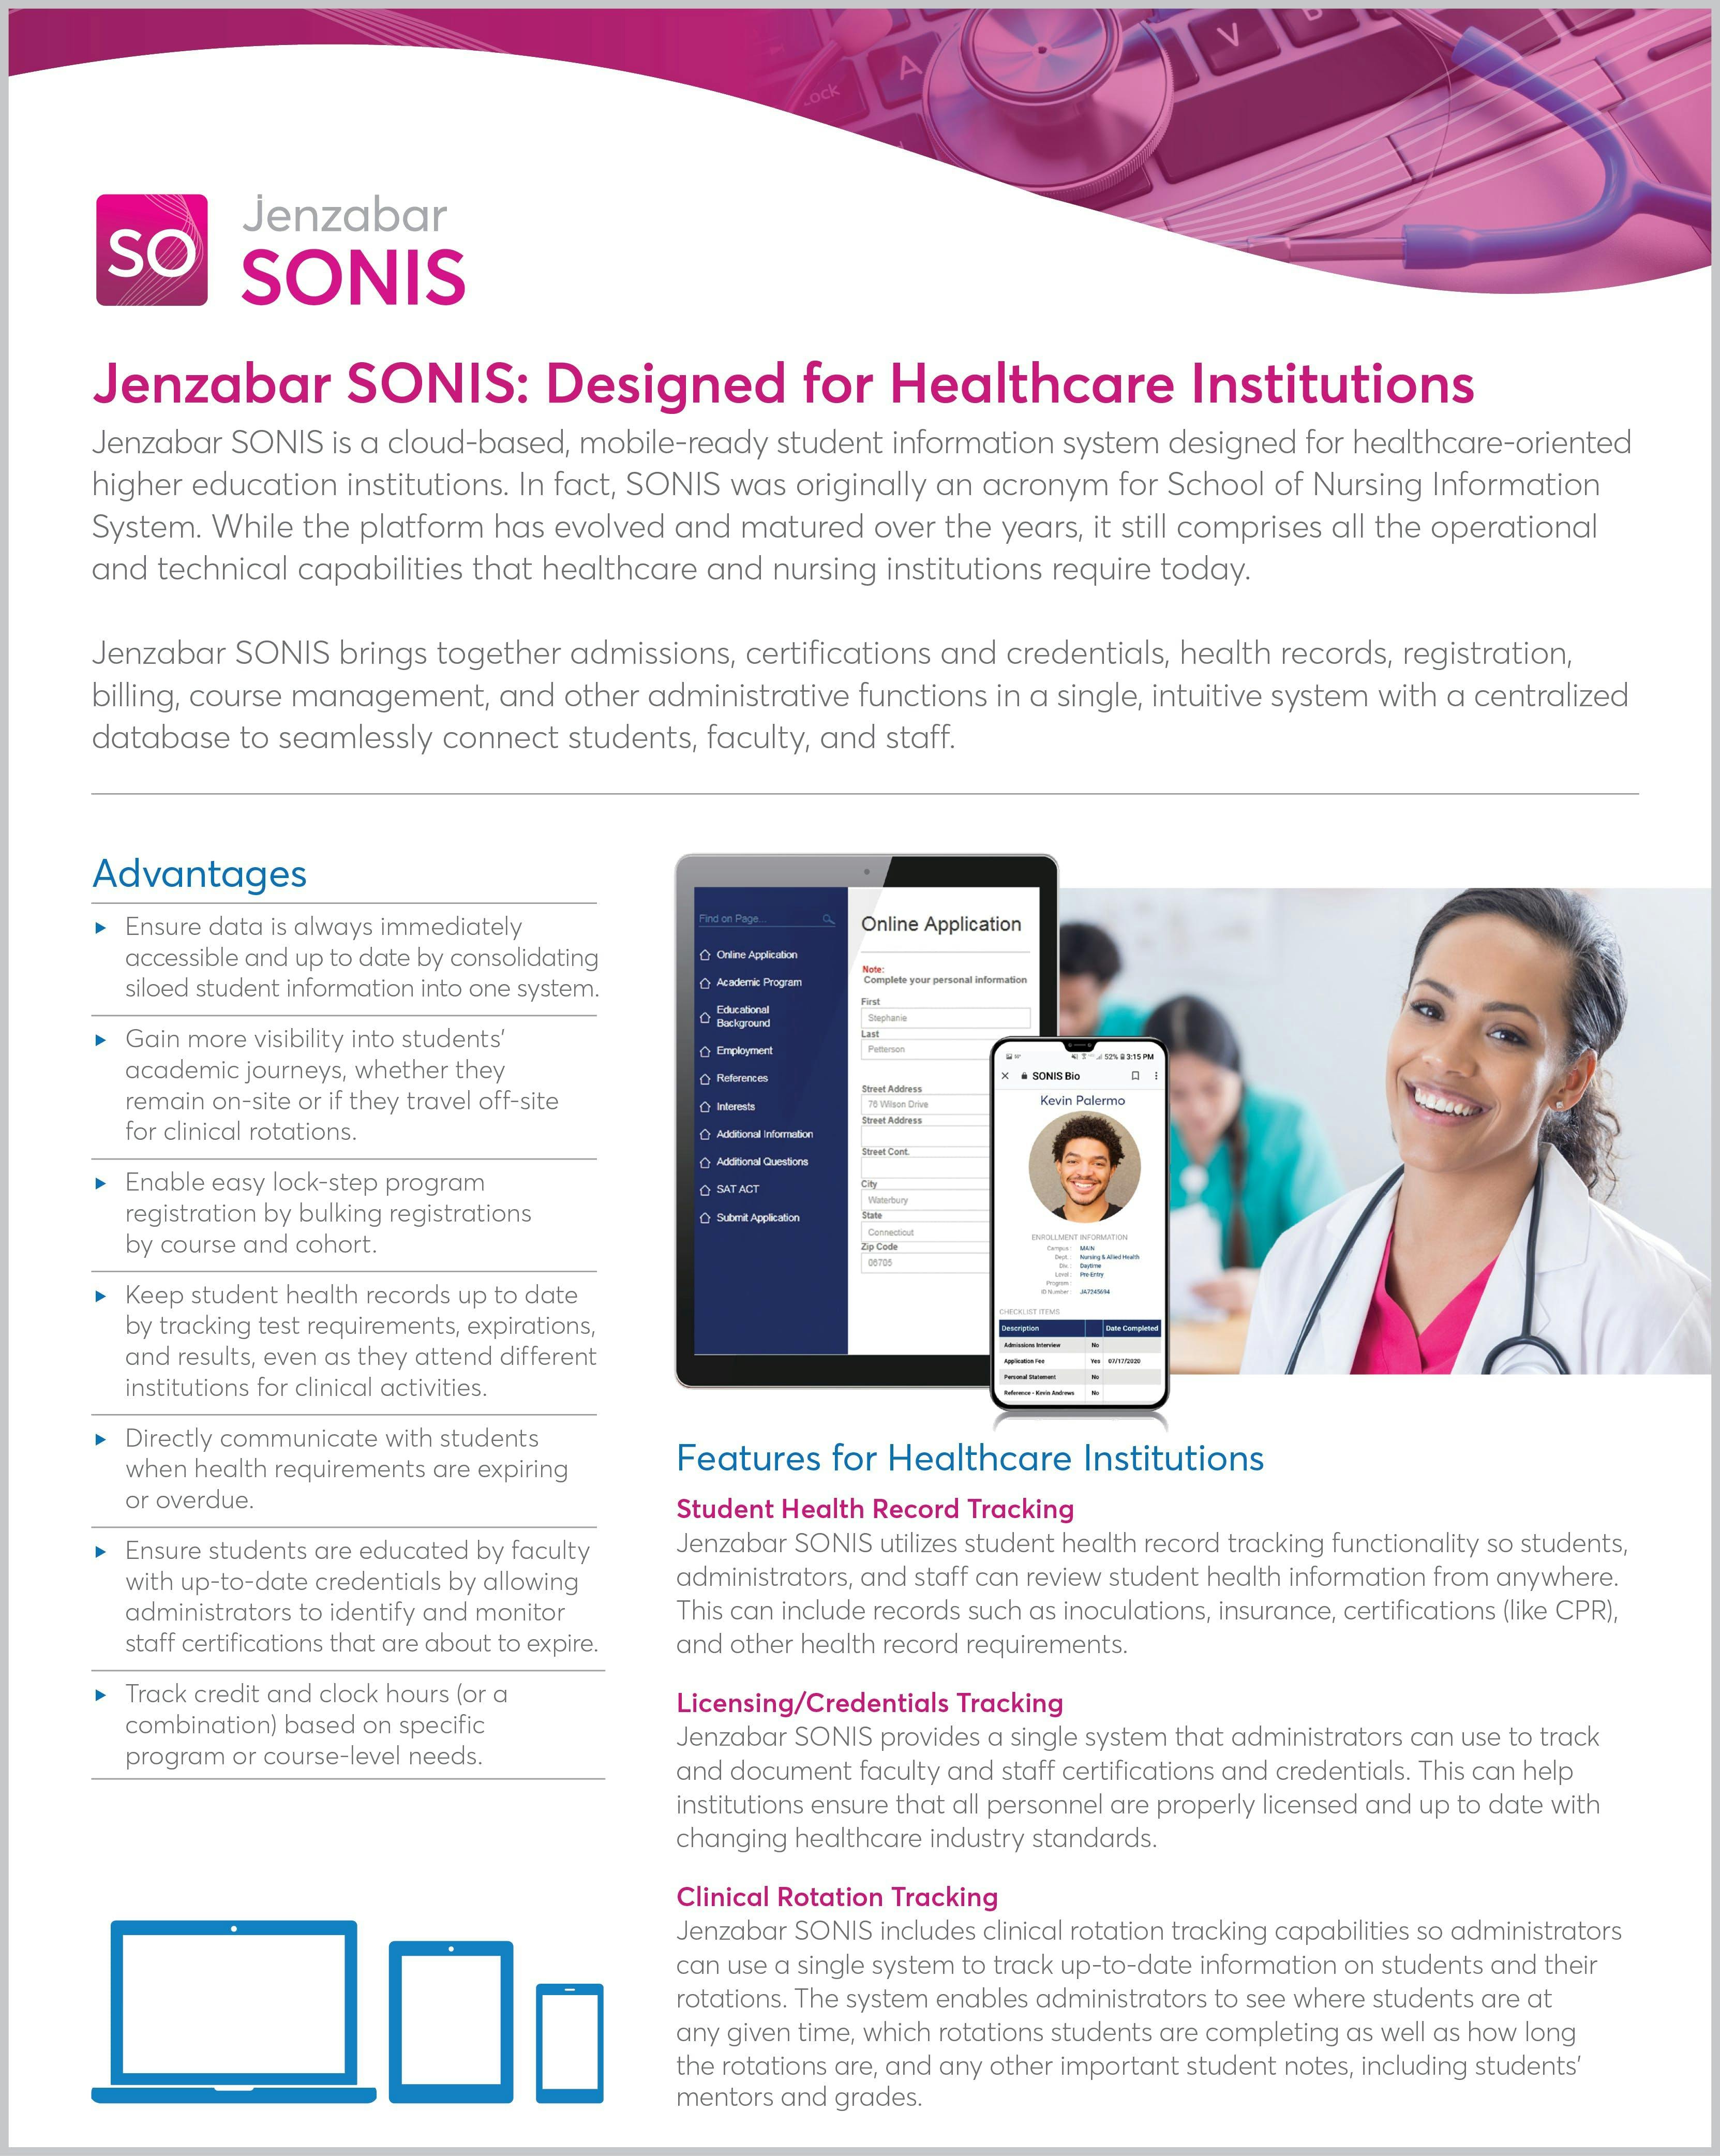 Product Sheet: Jenzabar SONIS for Healthcare Institutions